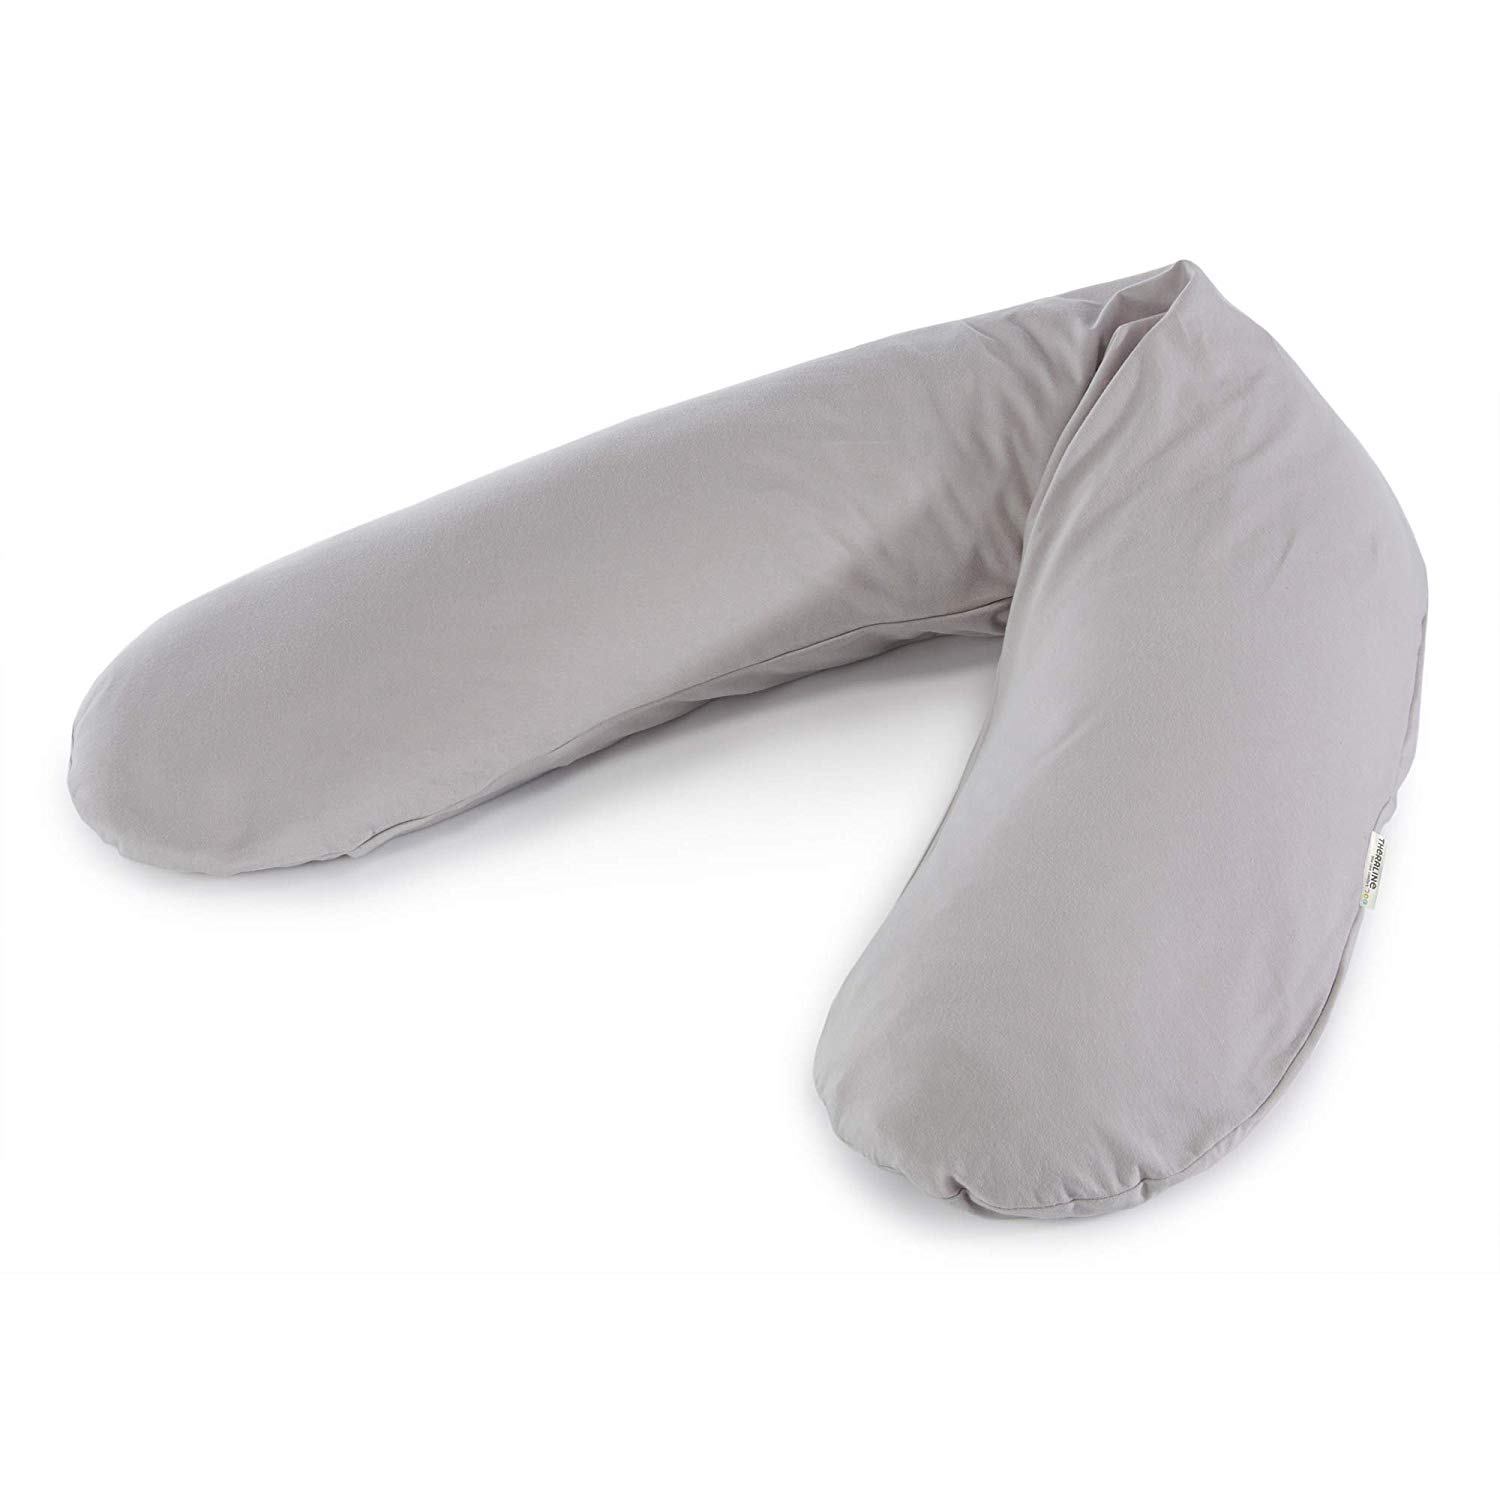 Original Theraline Nursing Pillow with Cover Jersey Grey